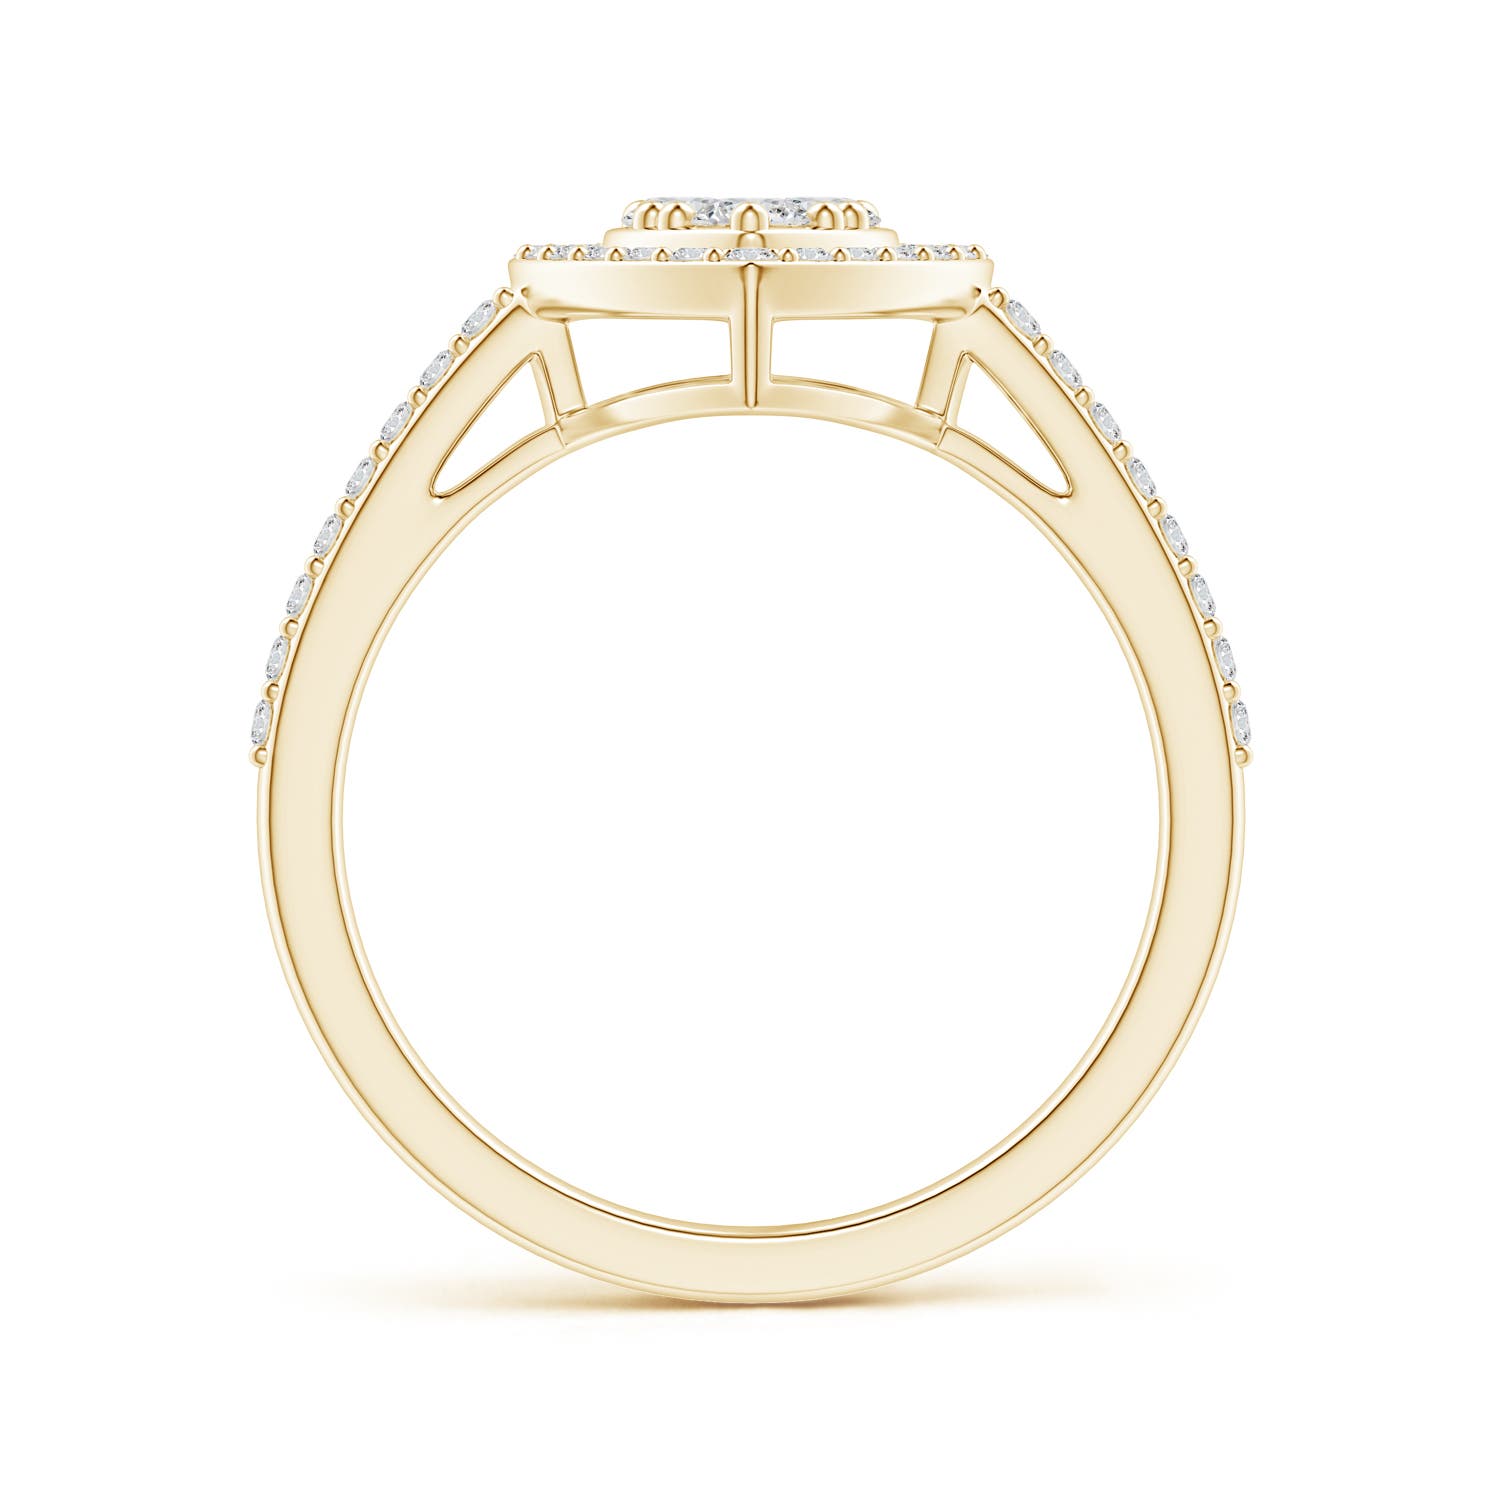 H, SI2 / 0.51 CT / 14 KT Yellow Gold